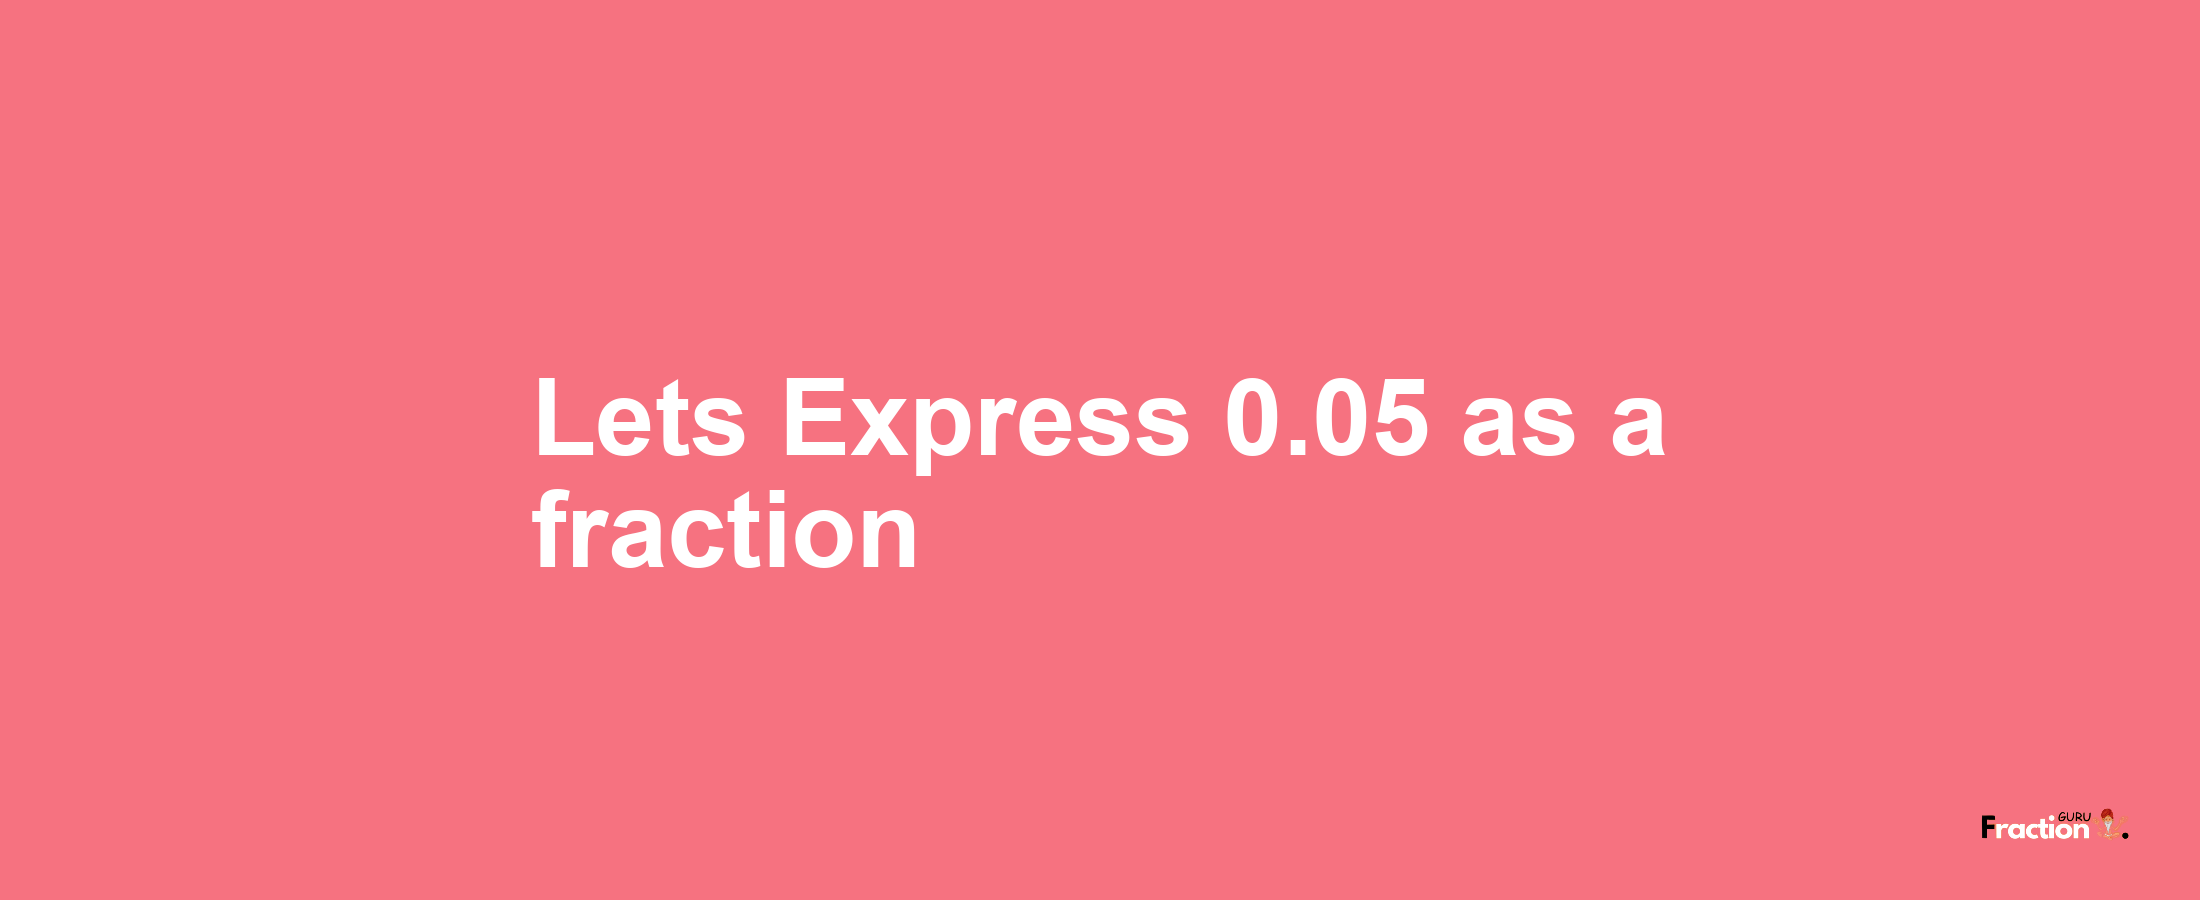 Lets Express 0.05 as afraction